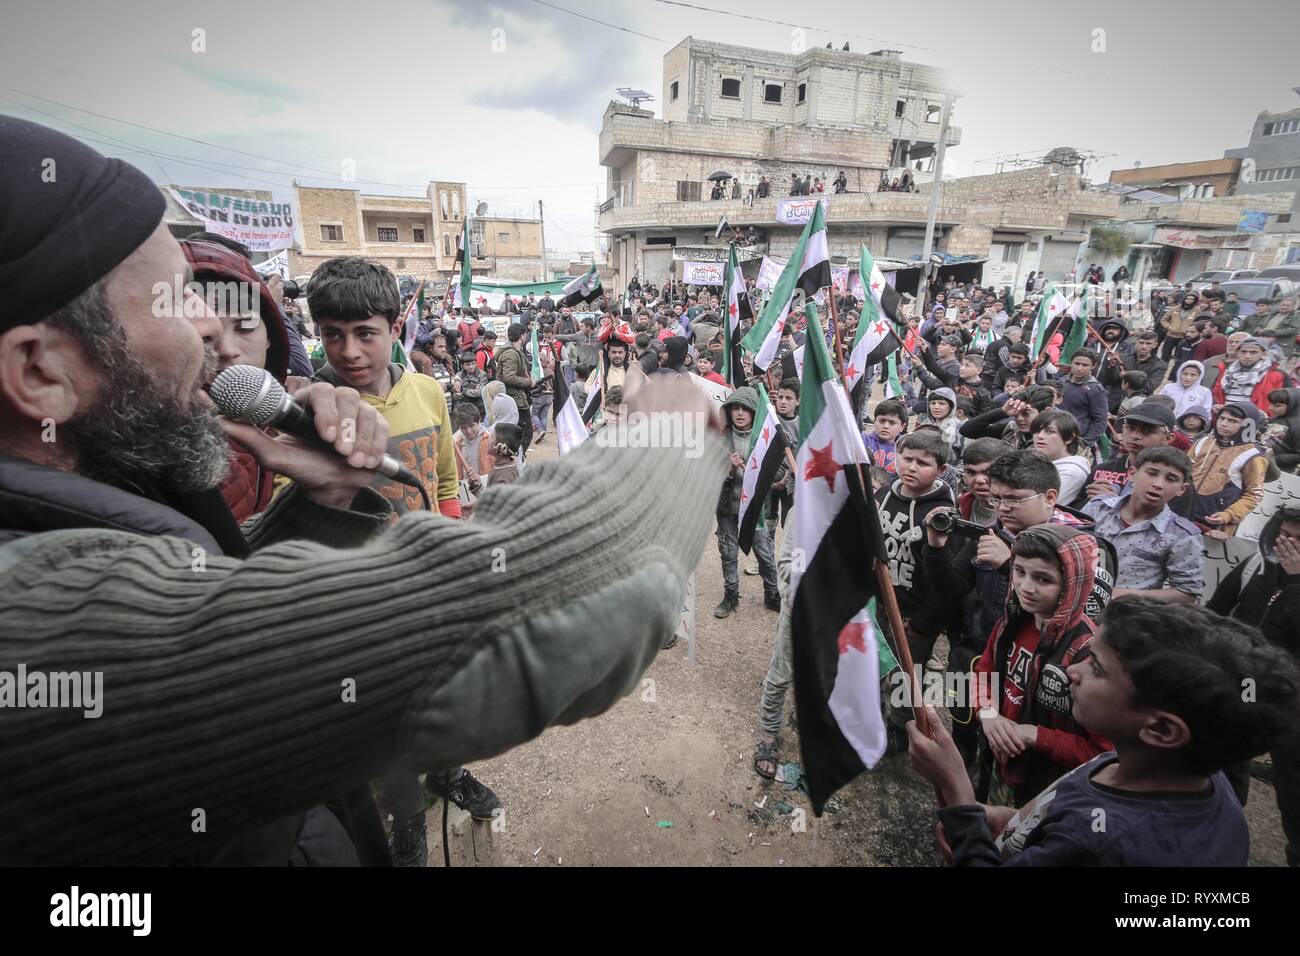 Benesh, Idleb, Syria. 15th Mar, 2019. A Syrian seen speaking to the participants holding opposition flags during the celebration.Syrians in the town of Bensh, which lies east of Idlib and controlled by the opposition, celebrated the eighth anniversary of the uprising against the rule of President Bashar al-Assad. Credit: Mohamad Saeed/SOPA Images/ZUMA Wire/Alamy Live News Stock Photo